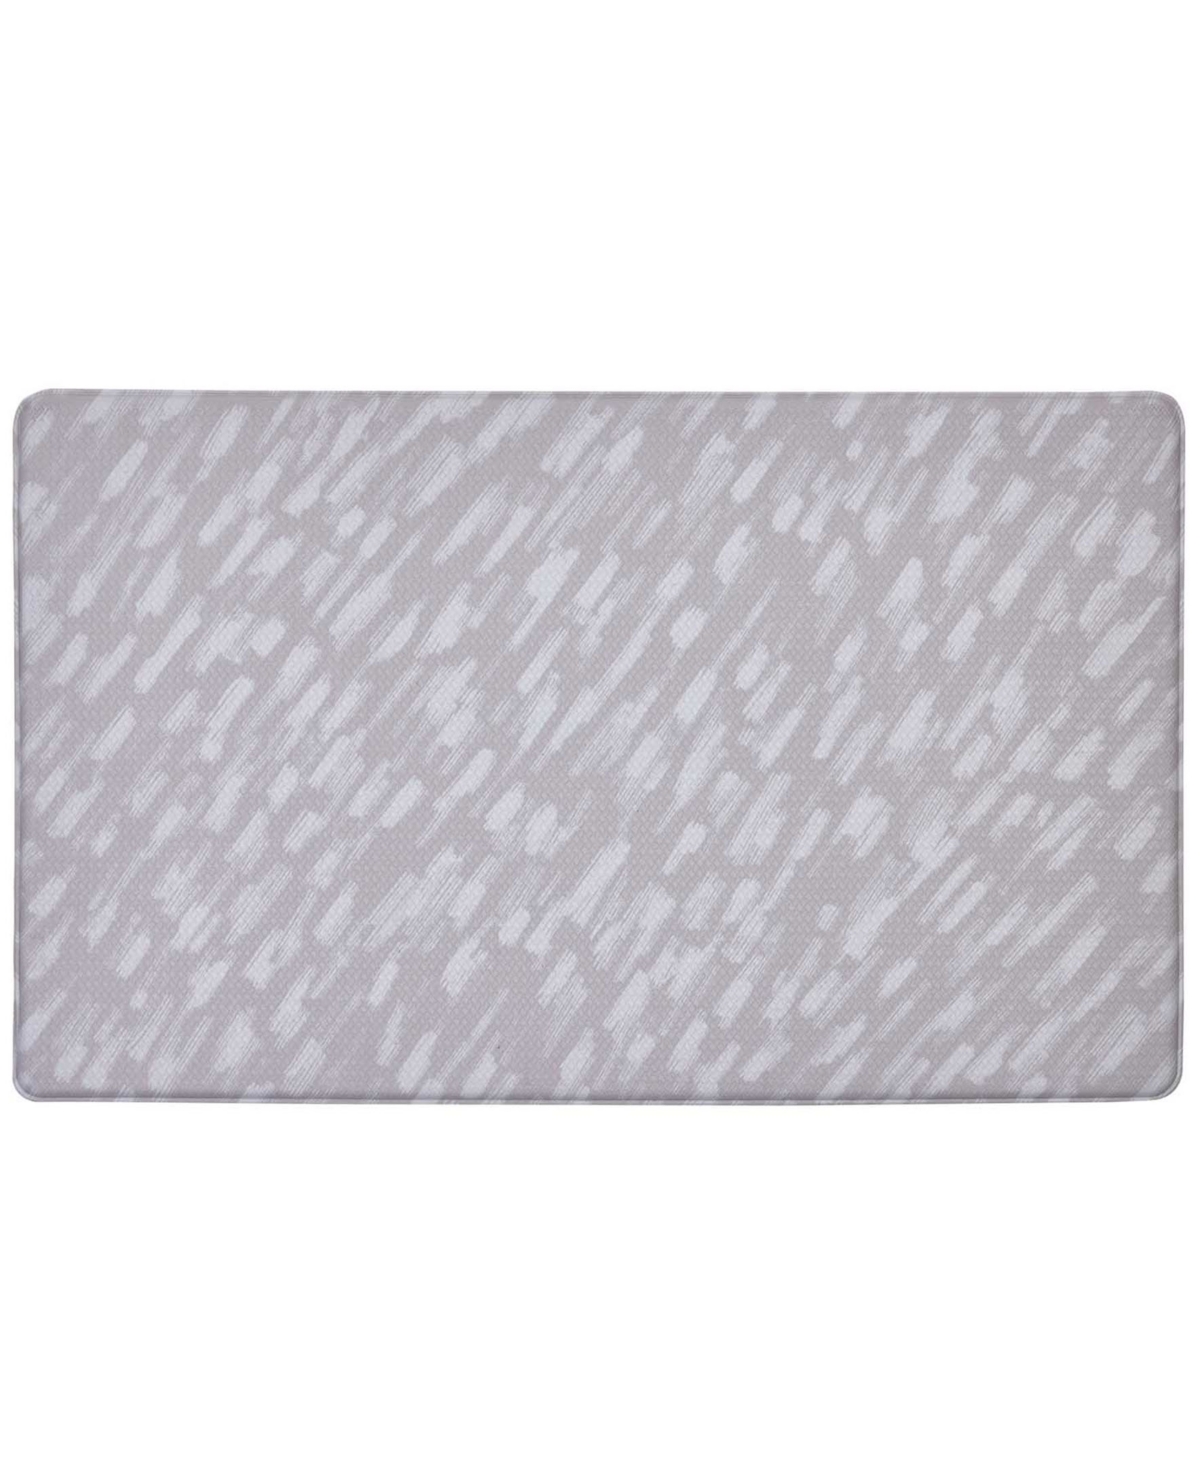 Tommy Bahama 20" X 36" Printed Polyvinyl Chloride Fatigue-resistant Mat In Gray White Rain